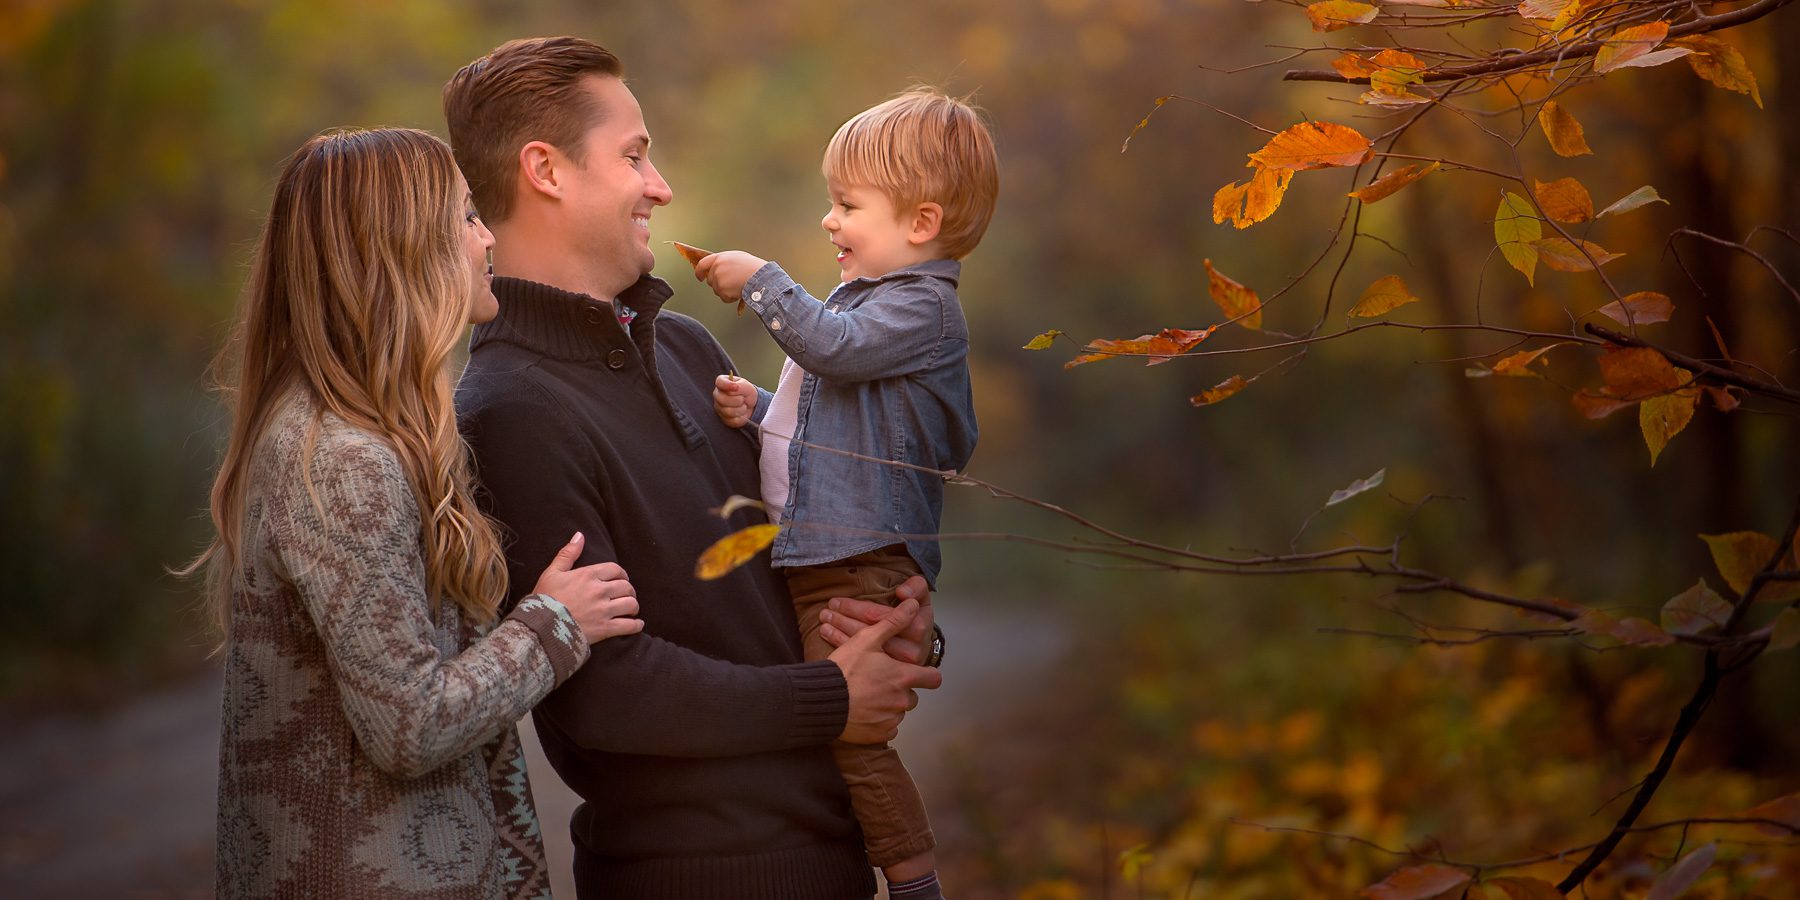 Fall family photo session Lake Zurich